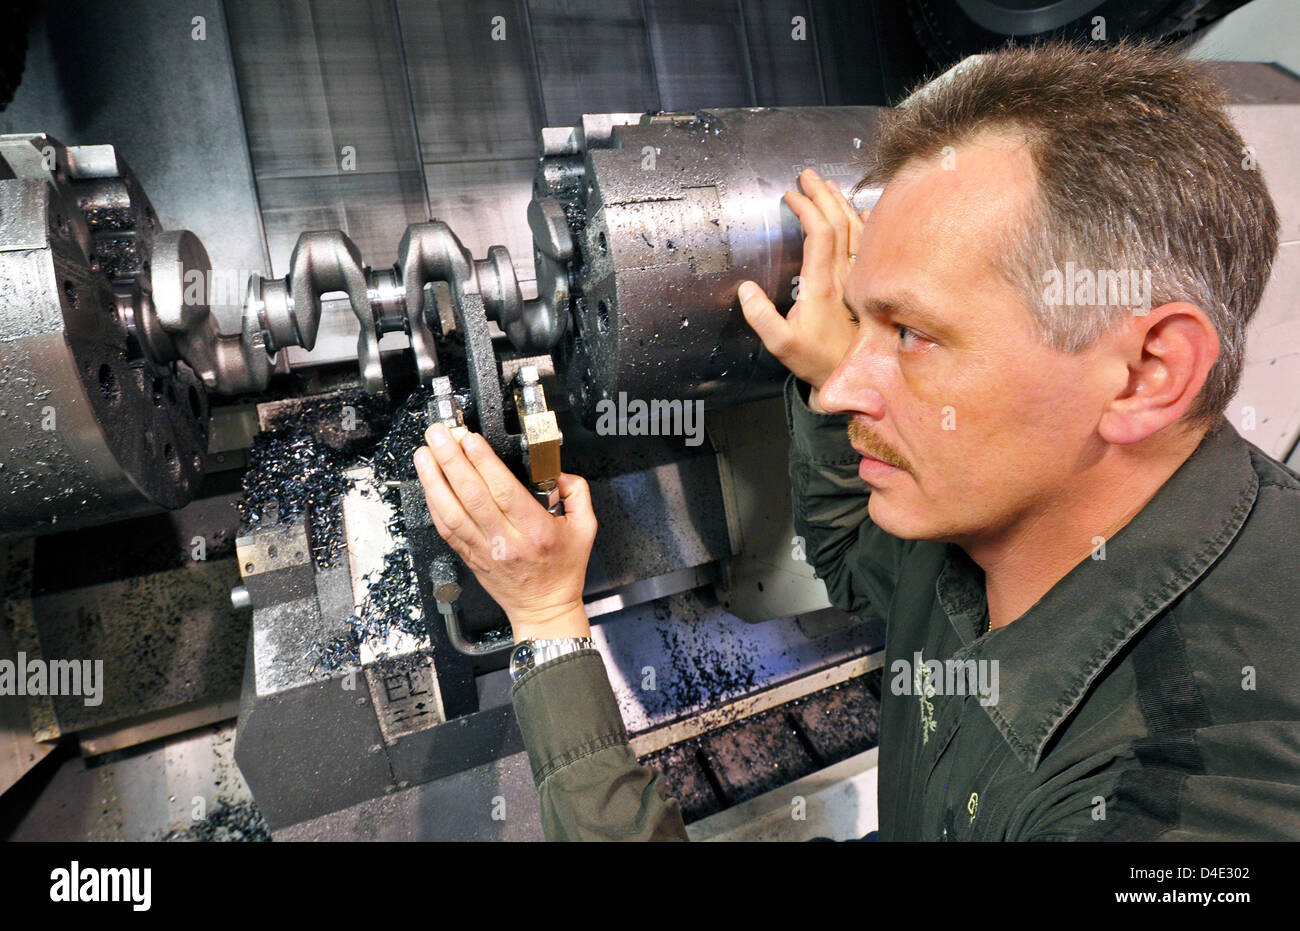 Plant manager Andreas Keitel of 'Fire Powertrain GmbH & Co KG' is pictured in a machining centre for crank shafts in Nordhausen, Germany, 07 October 2008. The company produces crank shafts for well-known automobile manufacturers such as Volkswagen, Audi, MAN and Daimler as well as the industrial engine manufacturer Cummins and JCB. The company exports almost 75 per cent of the prod Stock Photo